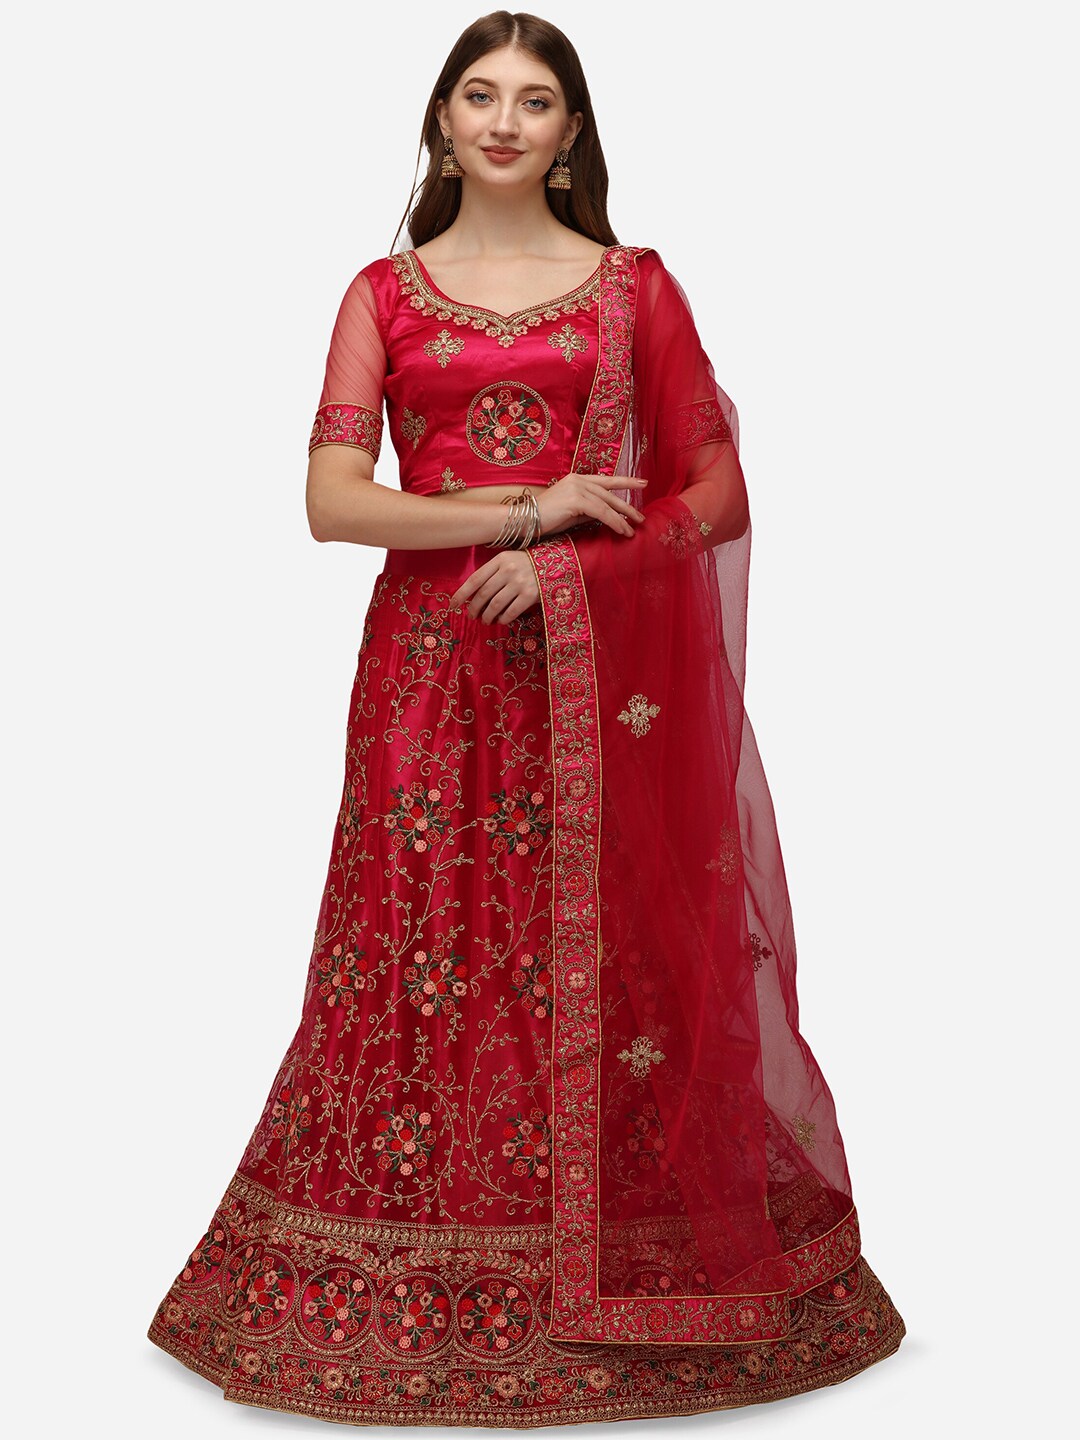 Netram Red Embroidered Semi-Stitched Lehenga & Unstitched Choli With Dupatta Price in India